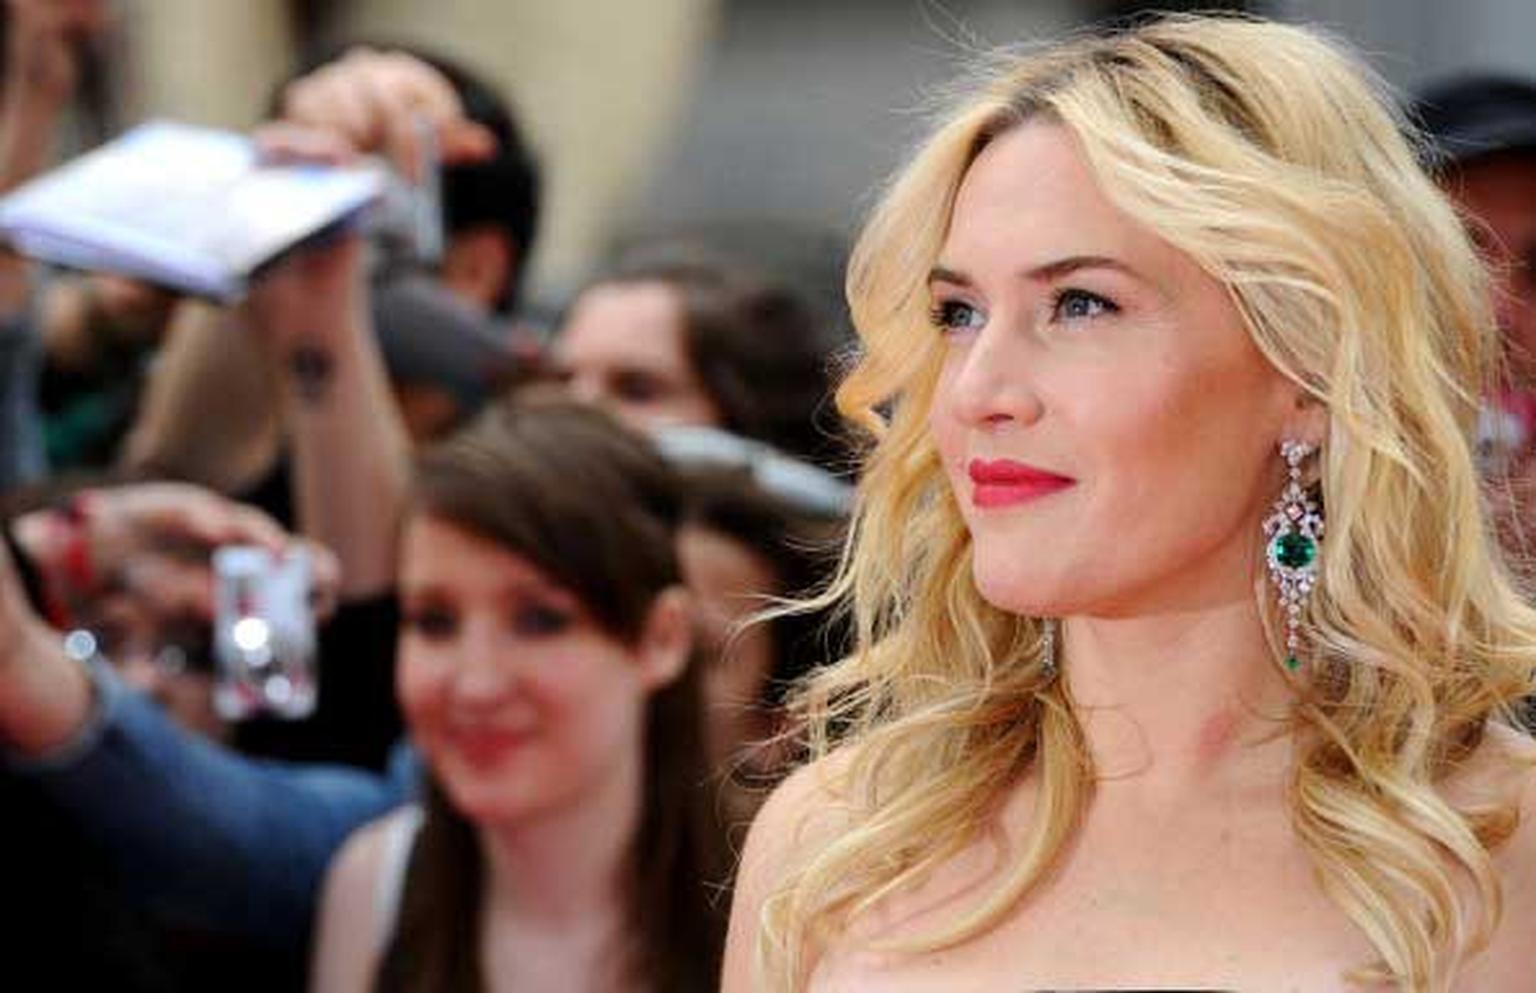 Kate Winslet looks radiant in David Morris emerald and diamond earrings as she says hello to fans at the London premiere of her new film, Divergent